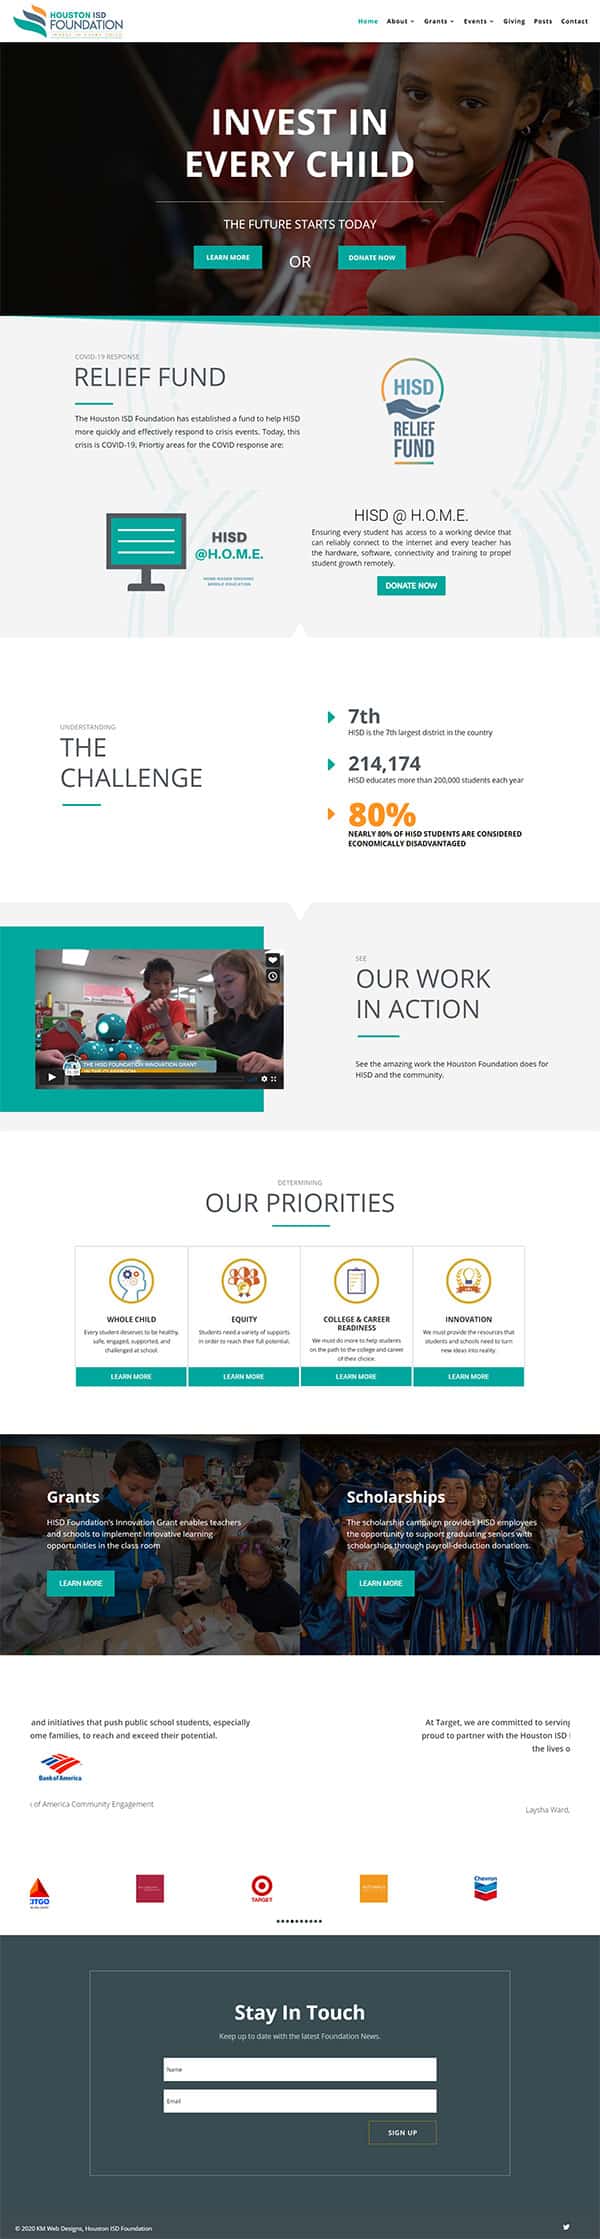 Houston ISD Foundation Home Page